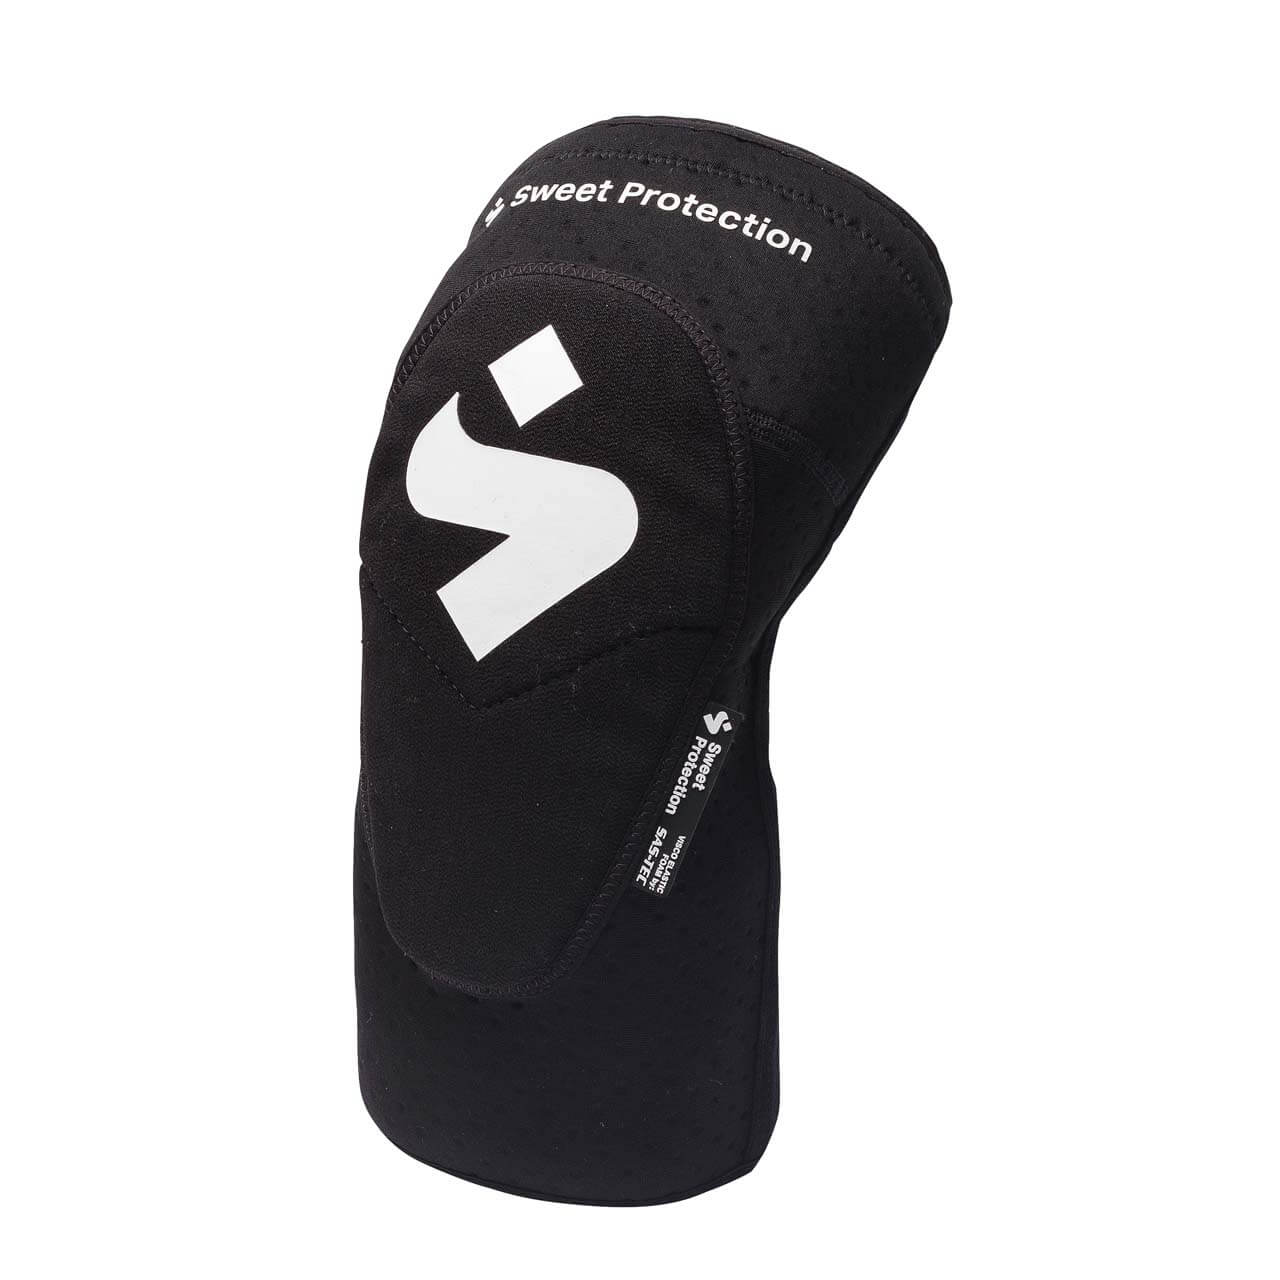 Sweet Protection Knee Guards - Black, M